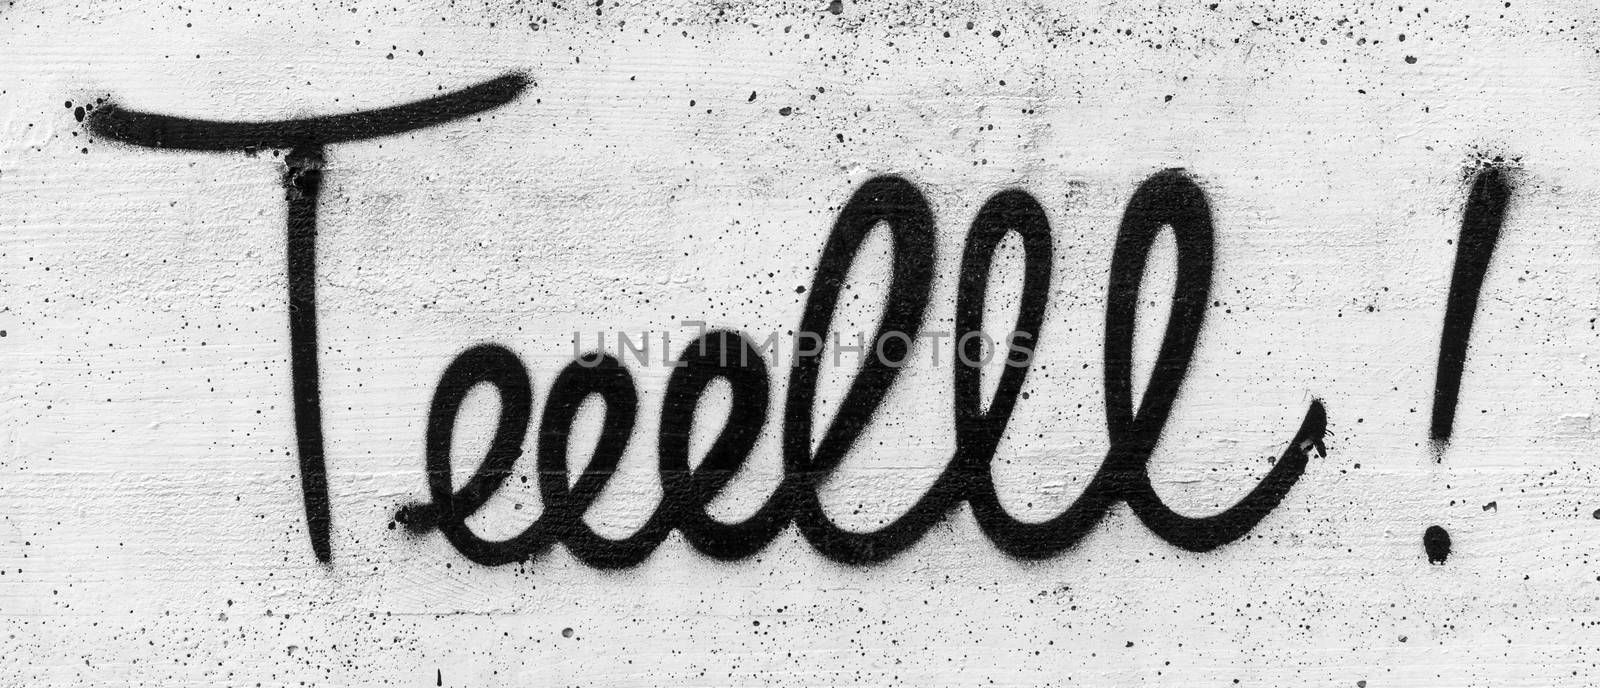 Graffiti whith text "Tell" by germanopoli